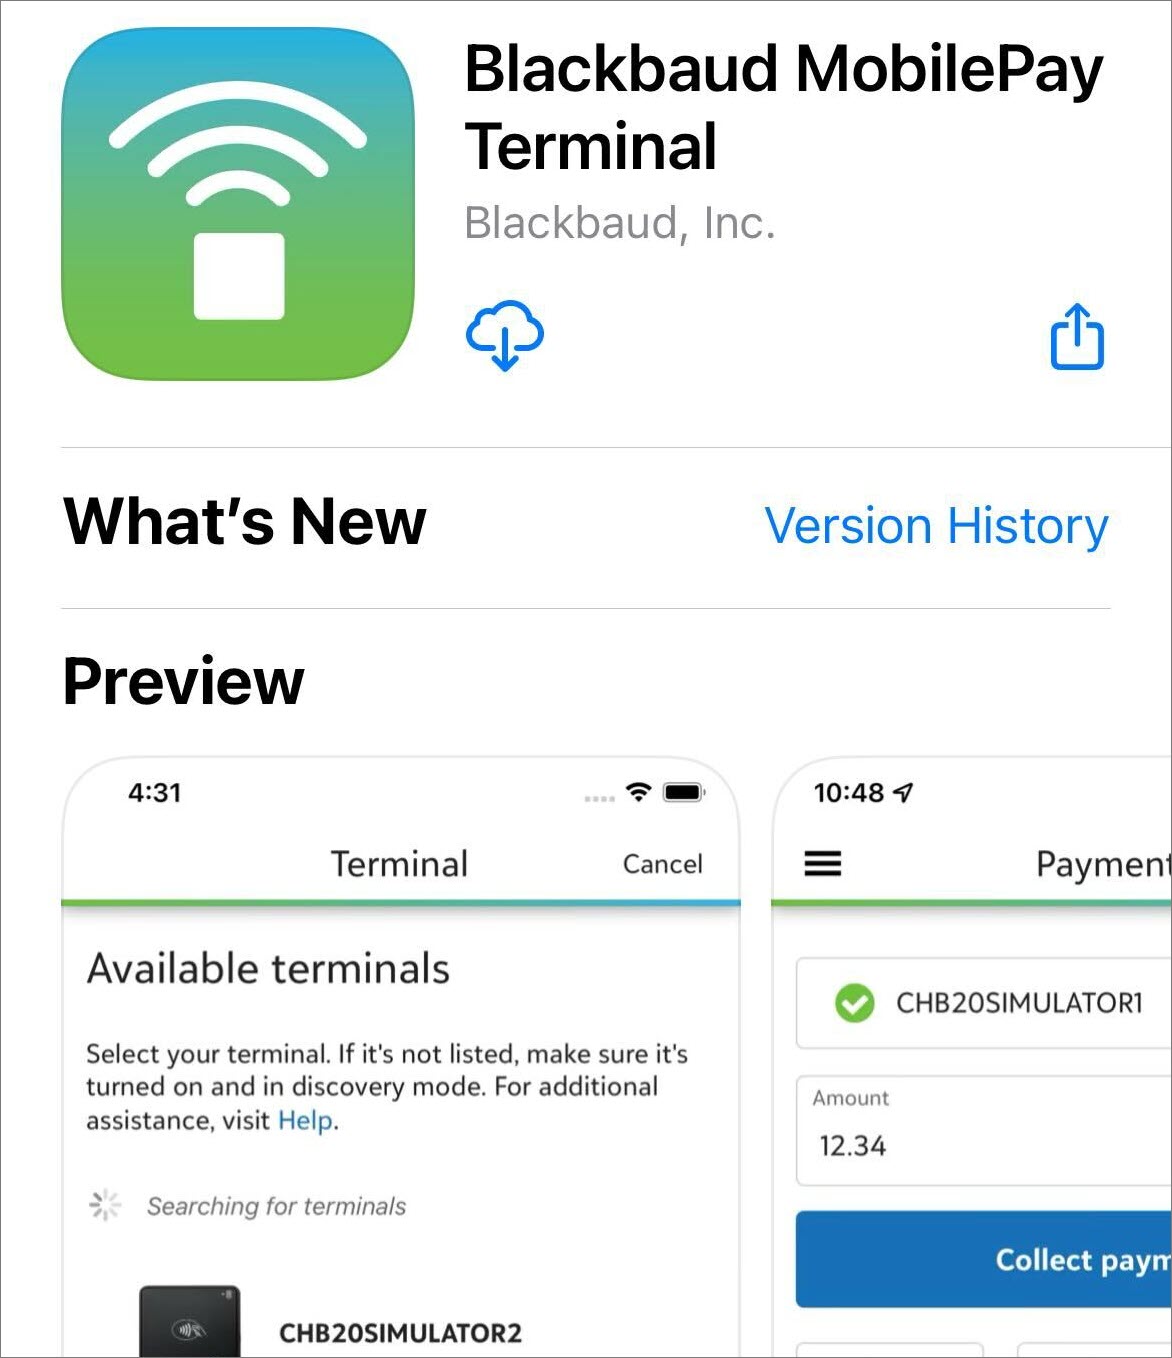 The app store listing for Blackbaud MobilePay Terminal which contains a list of what's new and screenshots from the app.